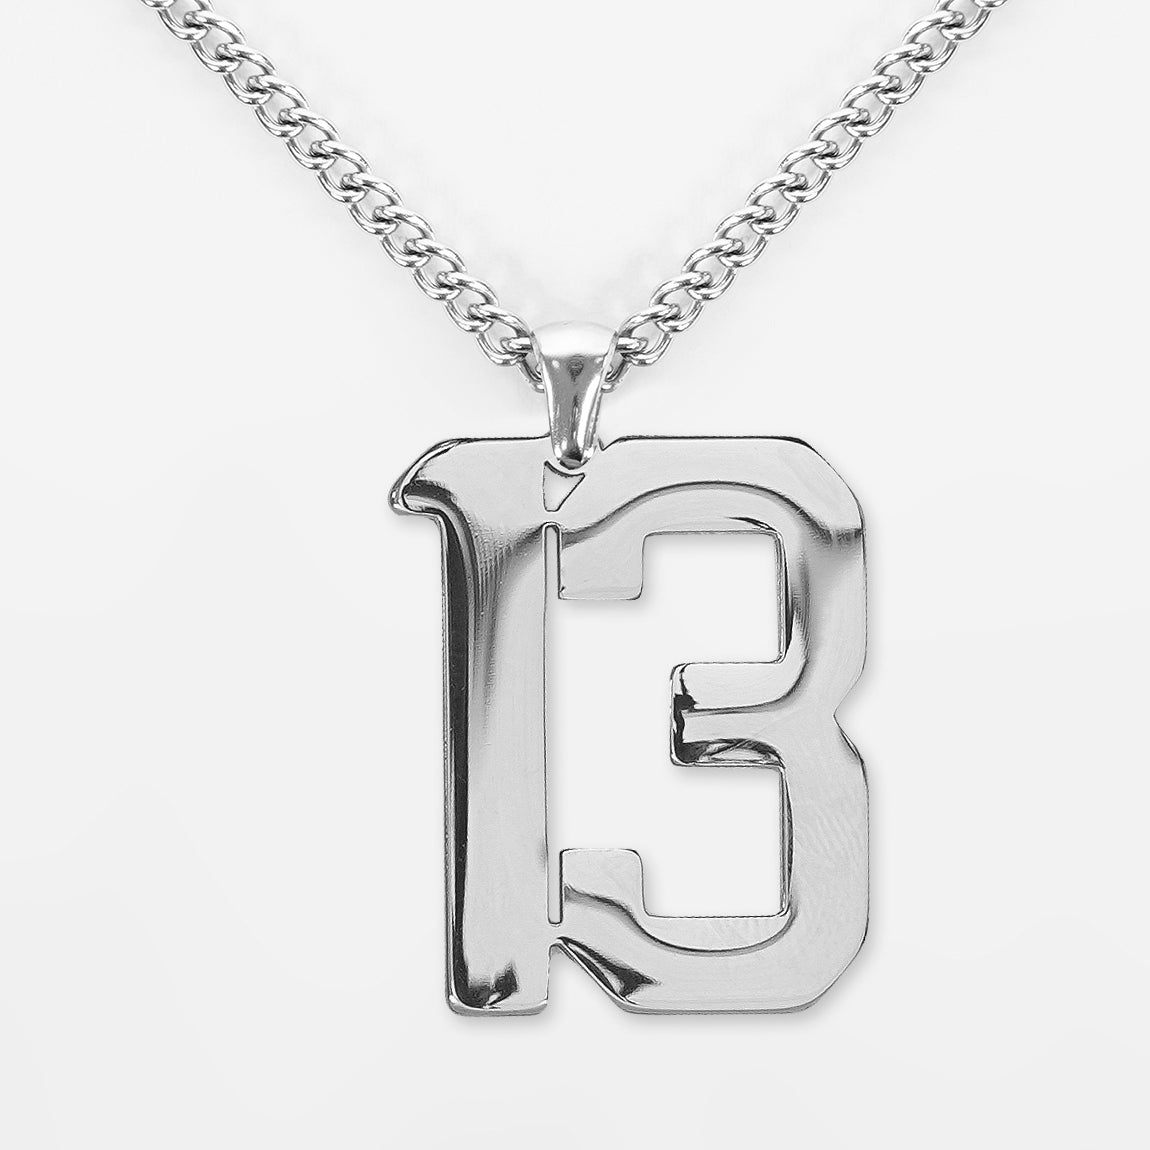 13 Number Pendant with Chain Necklace - Stainless Steel